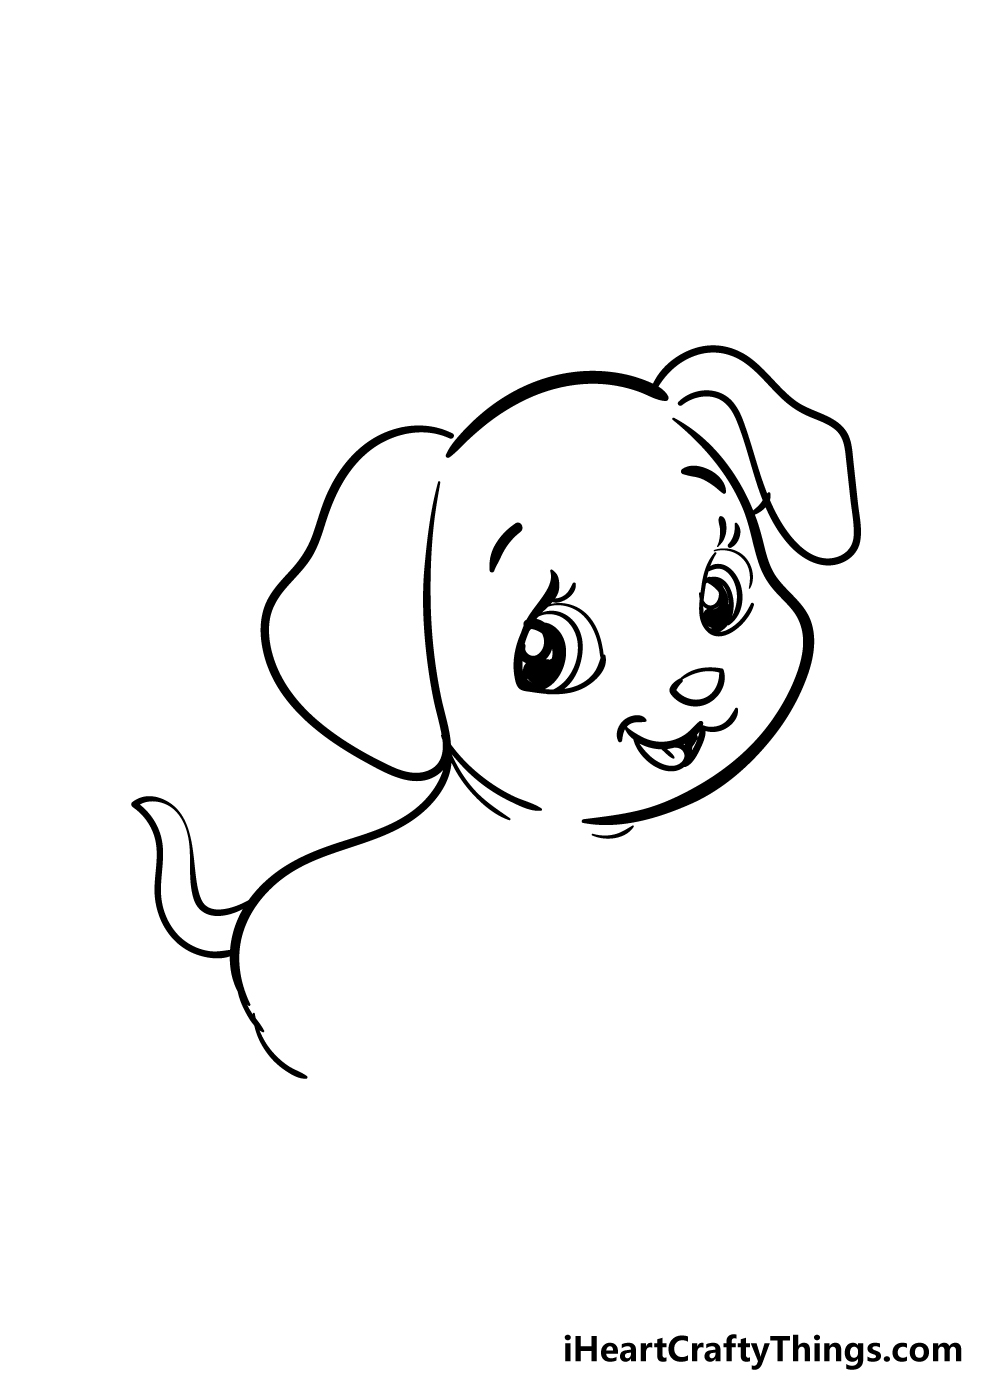 How to Draw a Puppy Step By Step – For Kids & Beginners